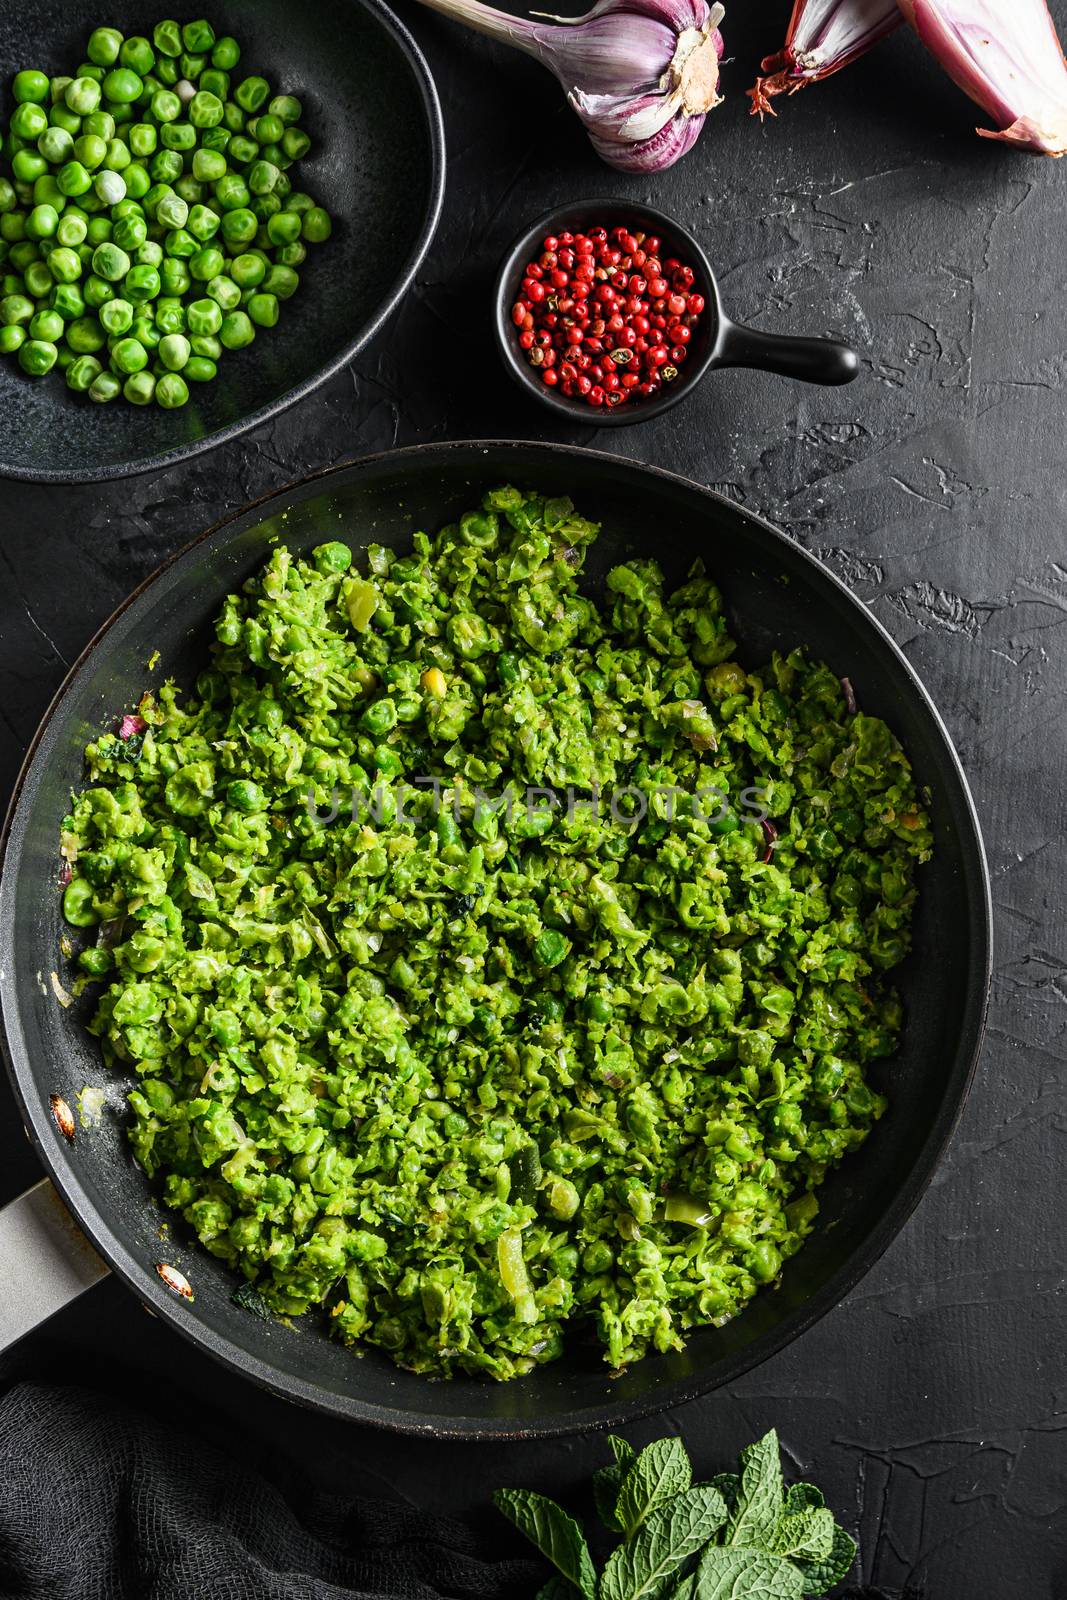 Mushy peas recipe cooked frying pan and peas in bowl with mint shallot pepper and salt on black stone surface organic keto food top view close up by Ilianesolenyi